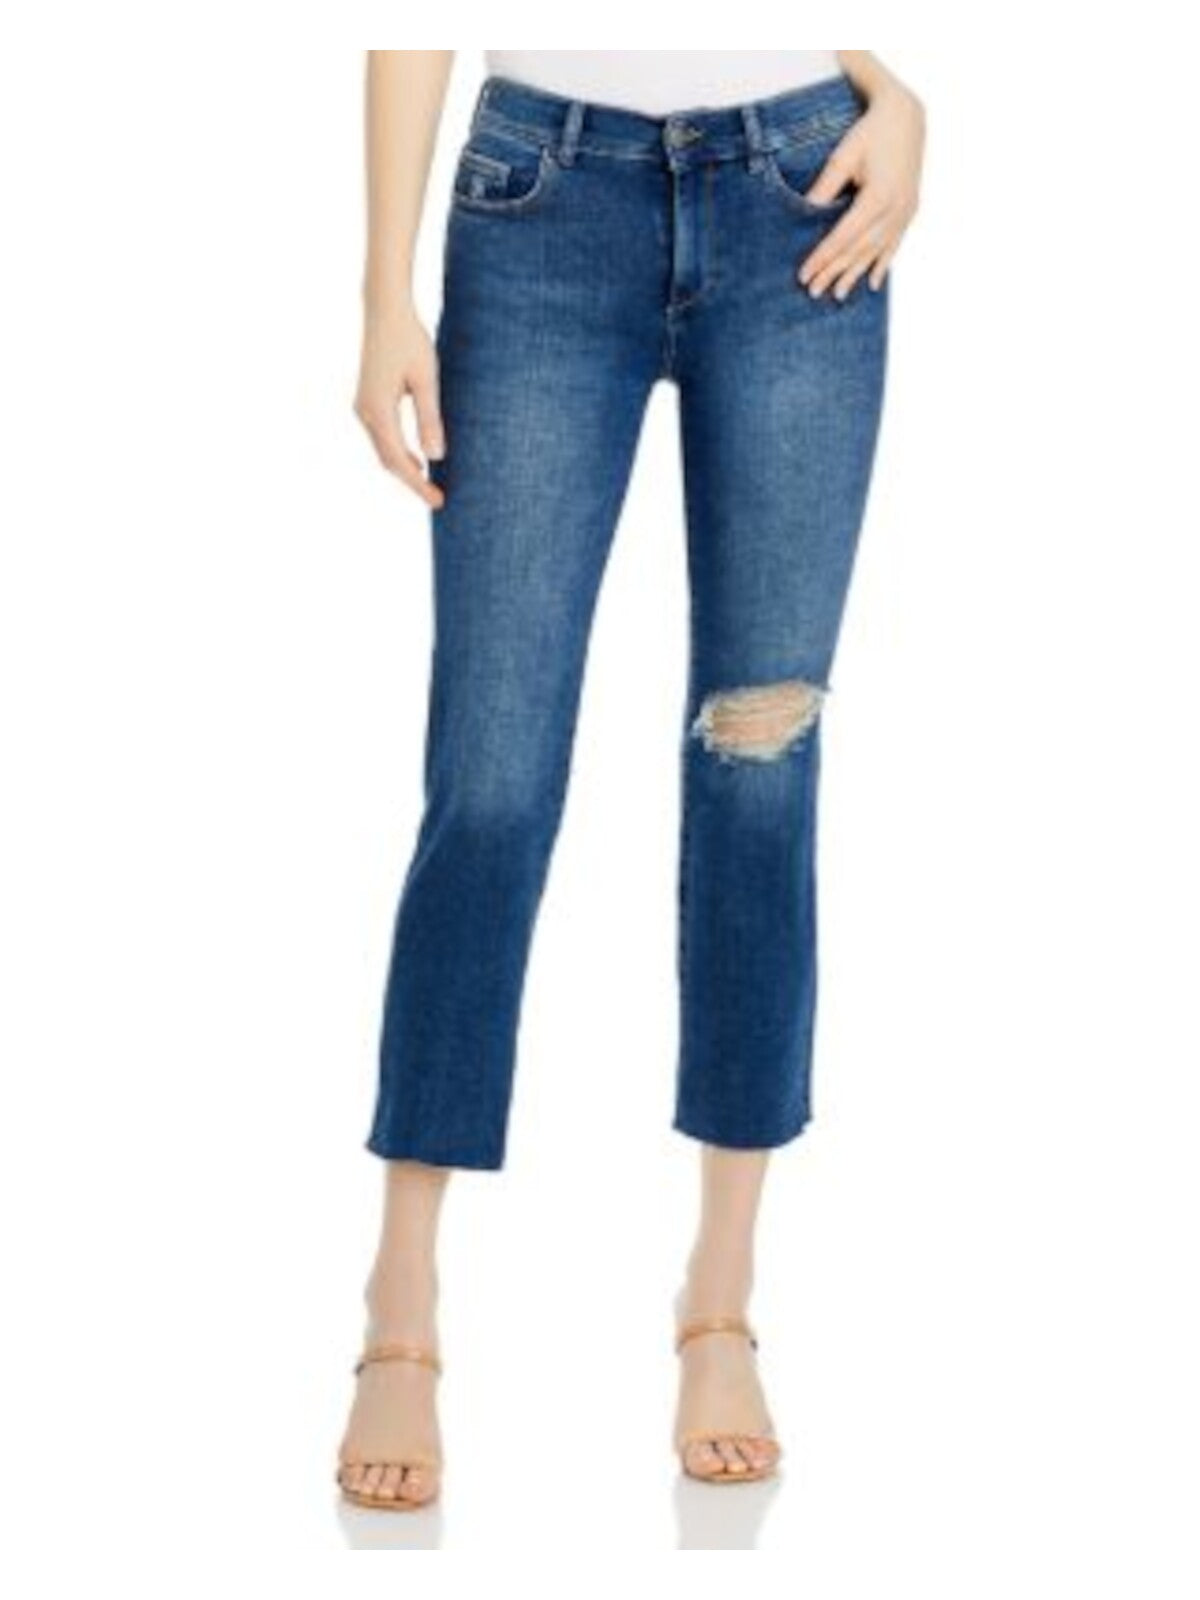 DL1961 Womens Blue Denim Zippered Pocketed Ripped Ankle Mid-Rise Straight leg Jeans Juniors 25